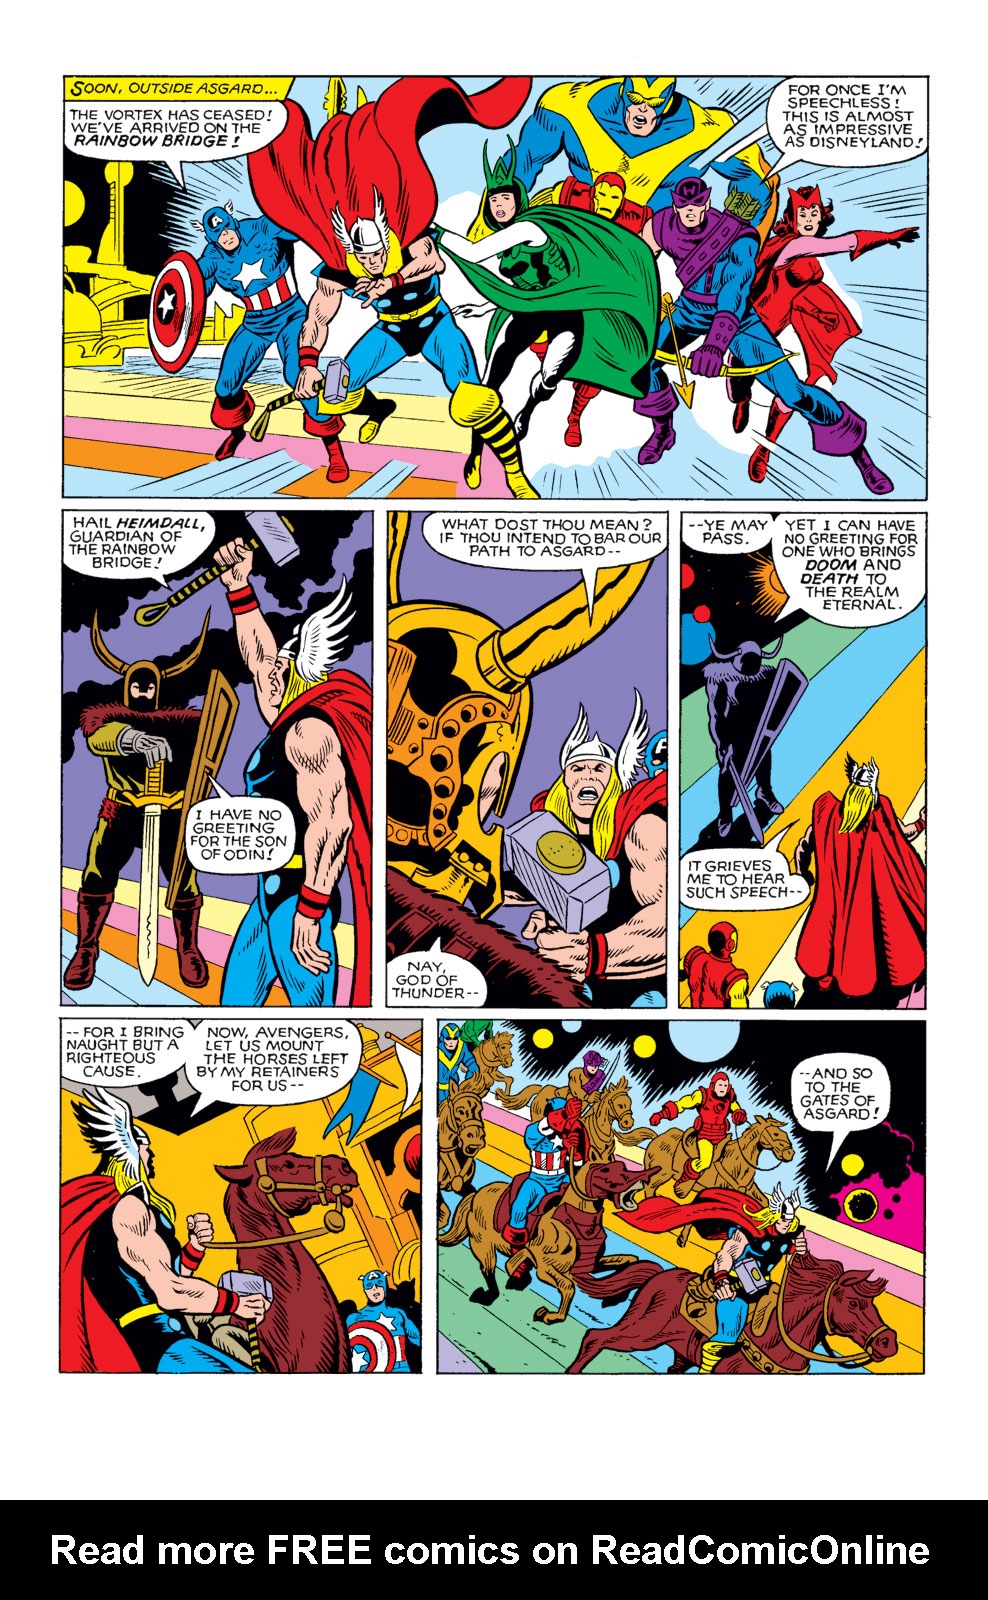 What If? (1977) Issue #25 - Thor and the Avengers battled the gods #25 - English 9